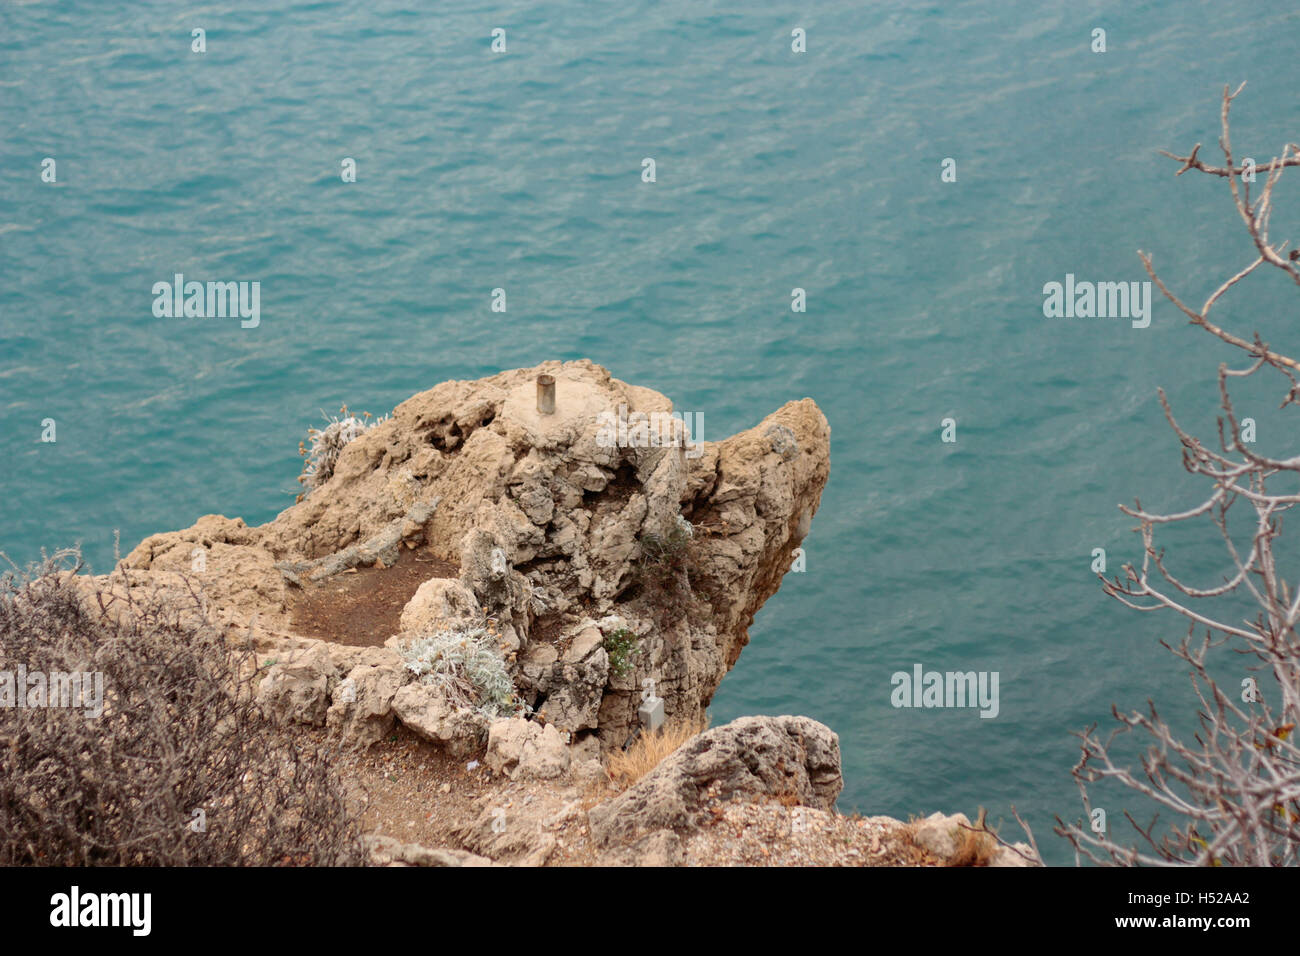 An example of Pareidolia - Rocky outcrop resembling a bear's head, over the Mediterranean Sea at Nice, France Stock Photo